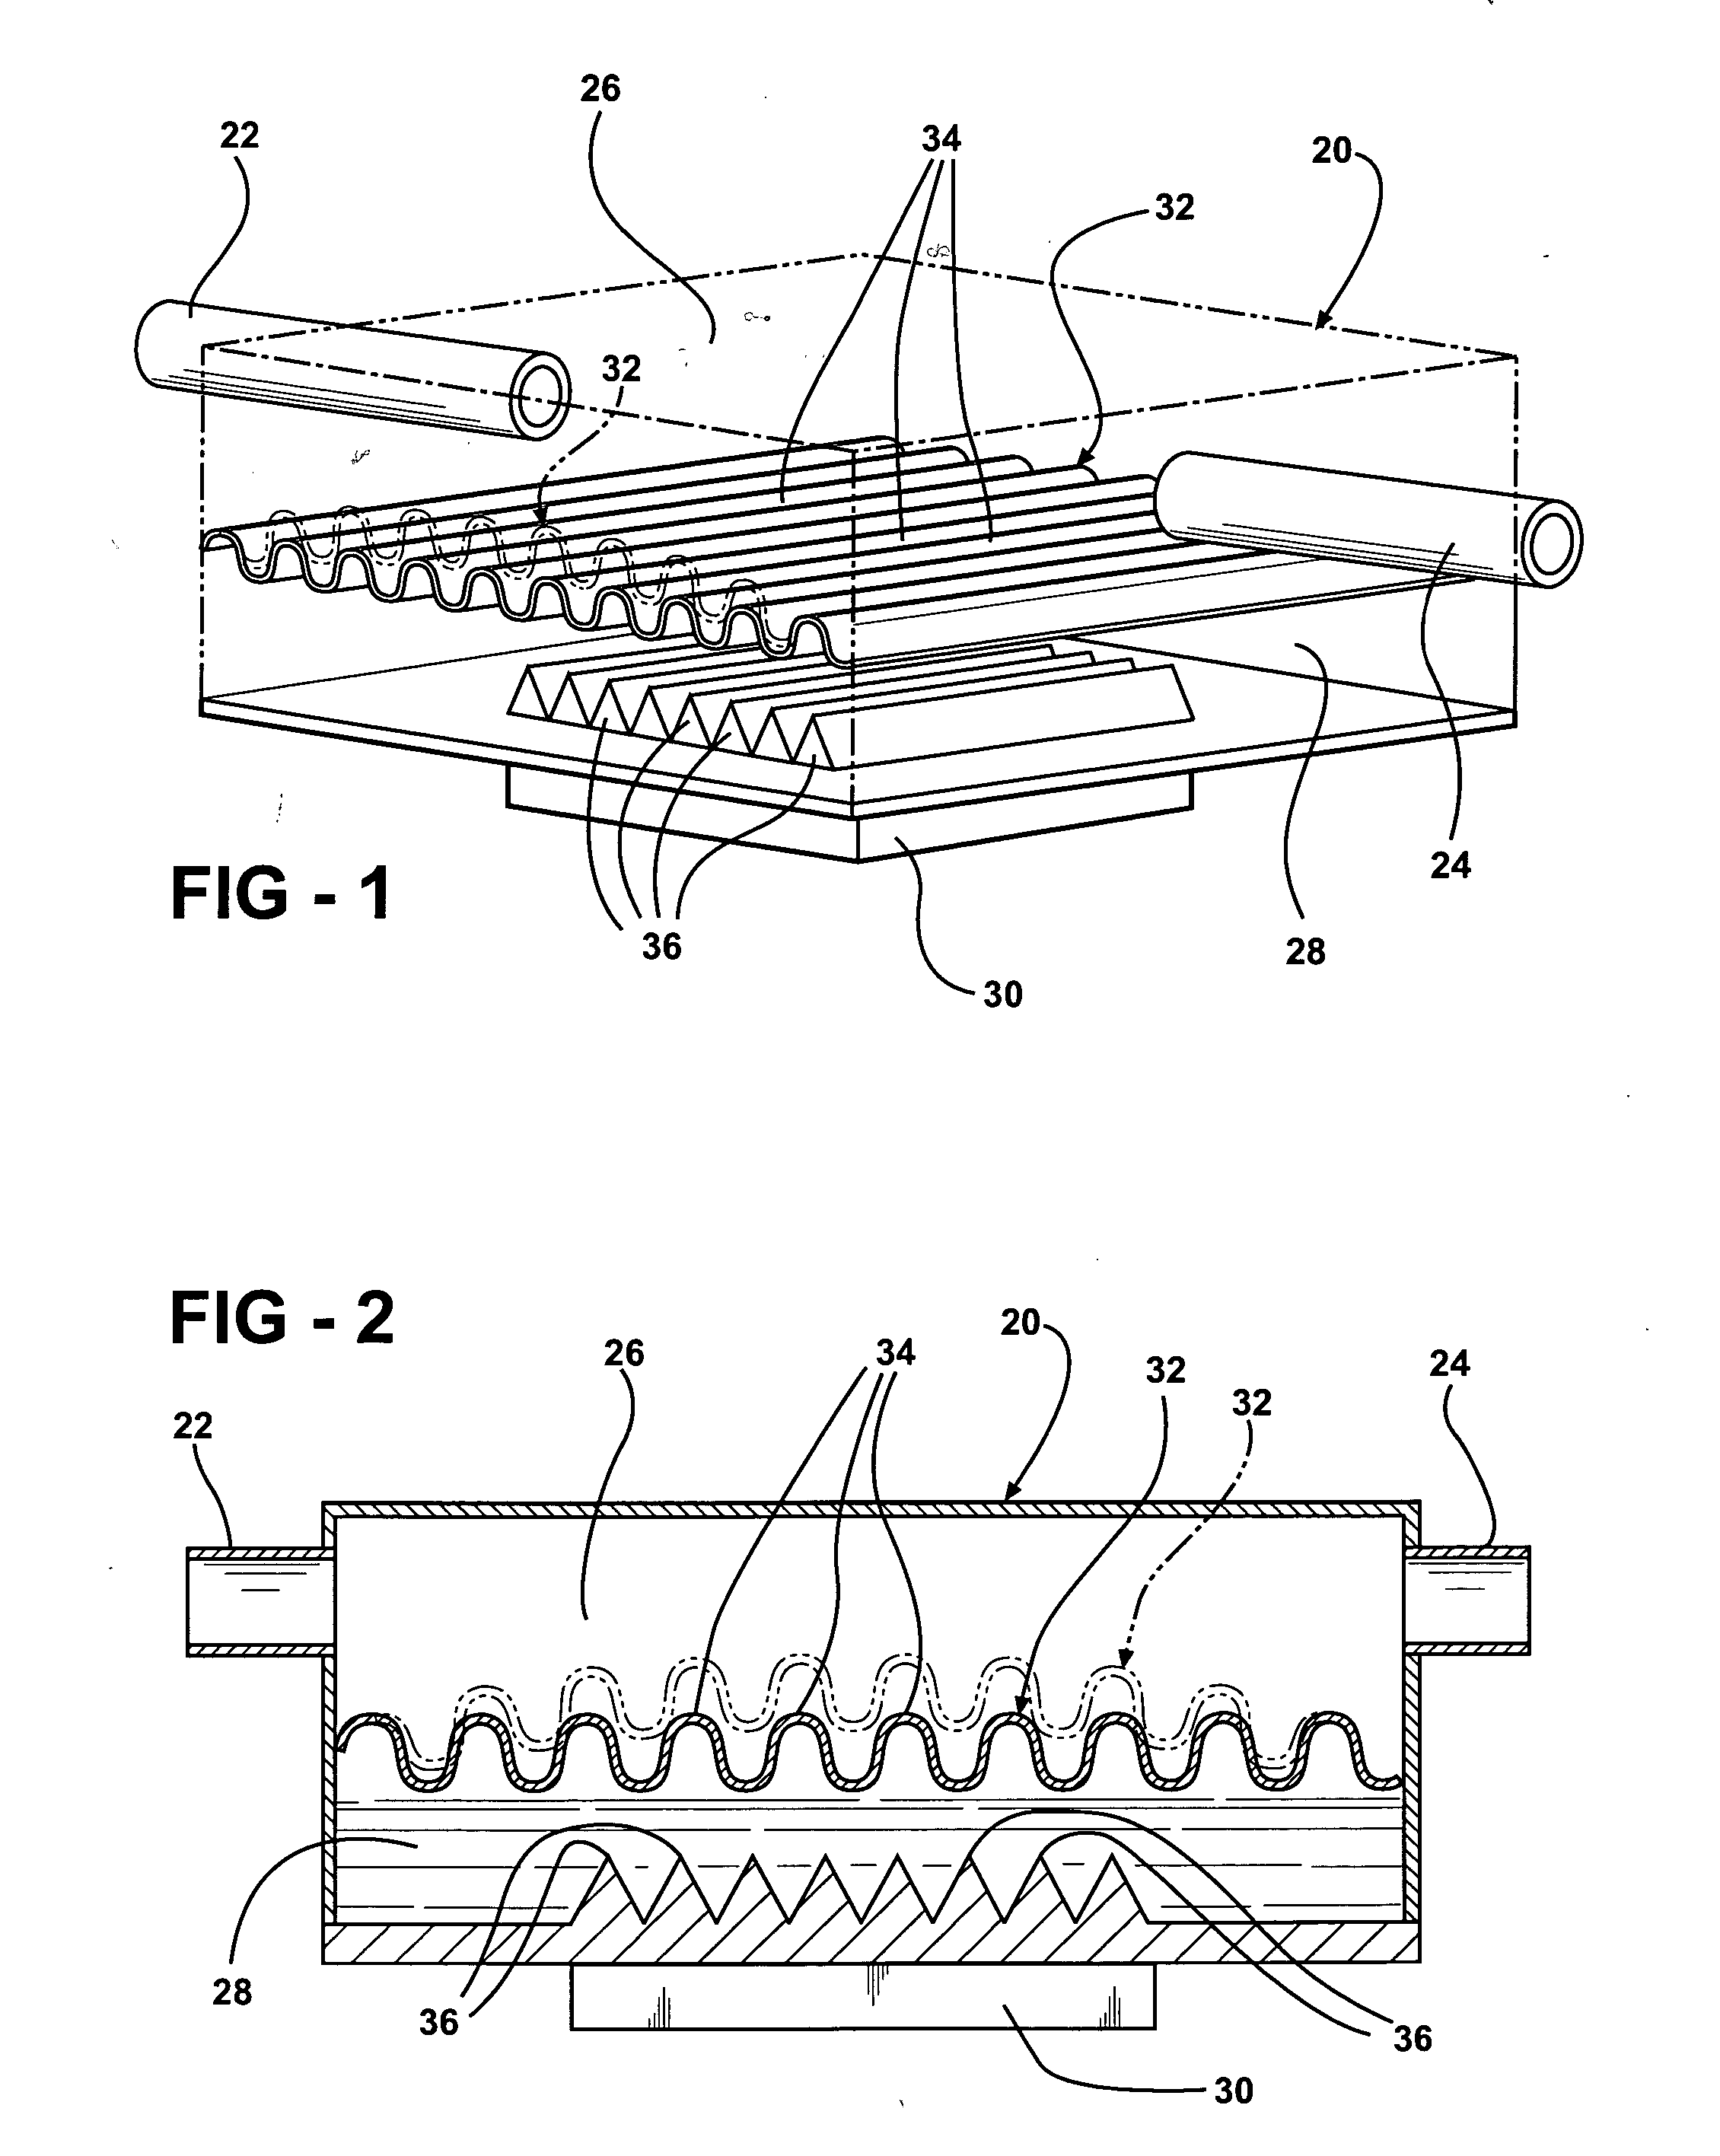 Liquid cooled thermosiphon with flexible partition